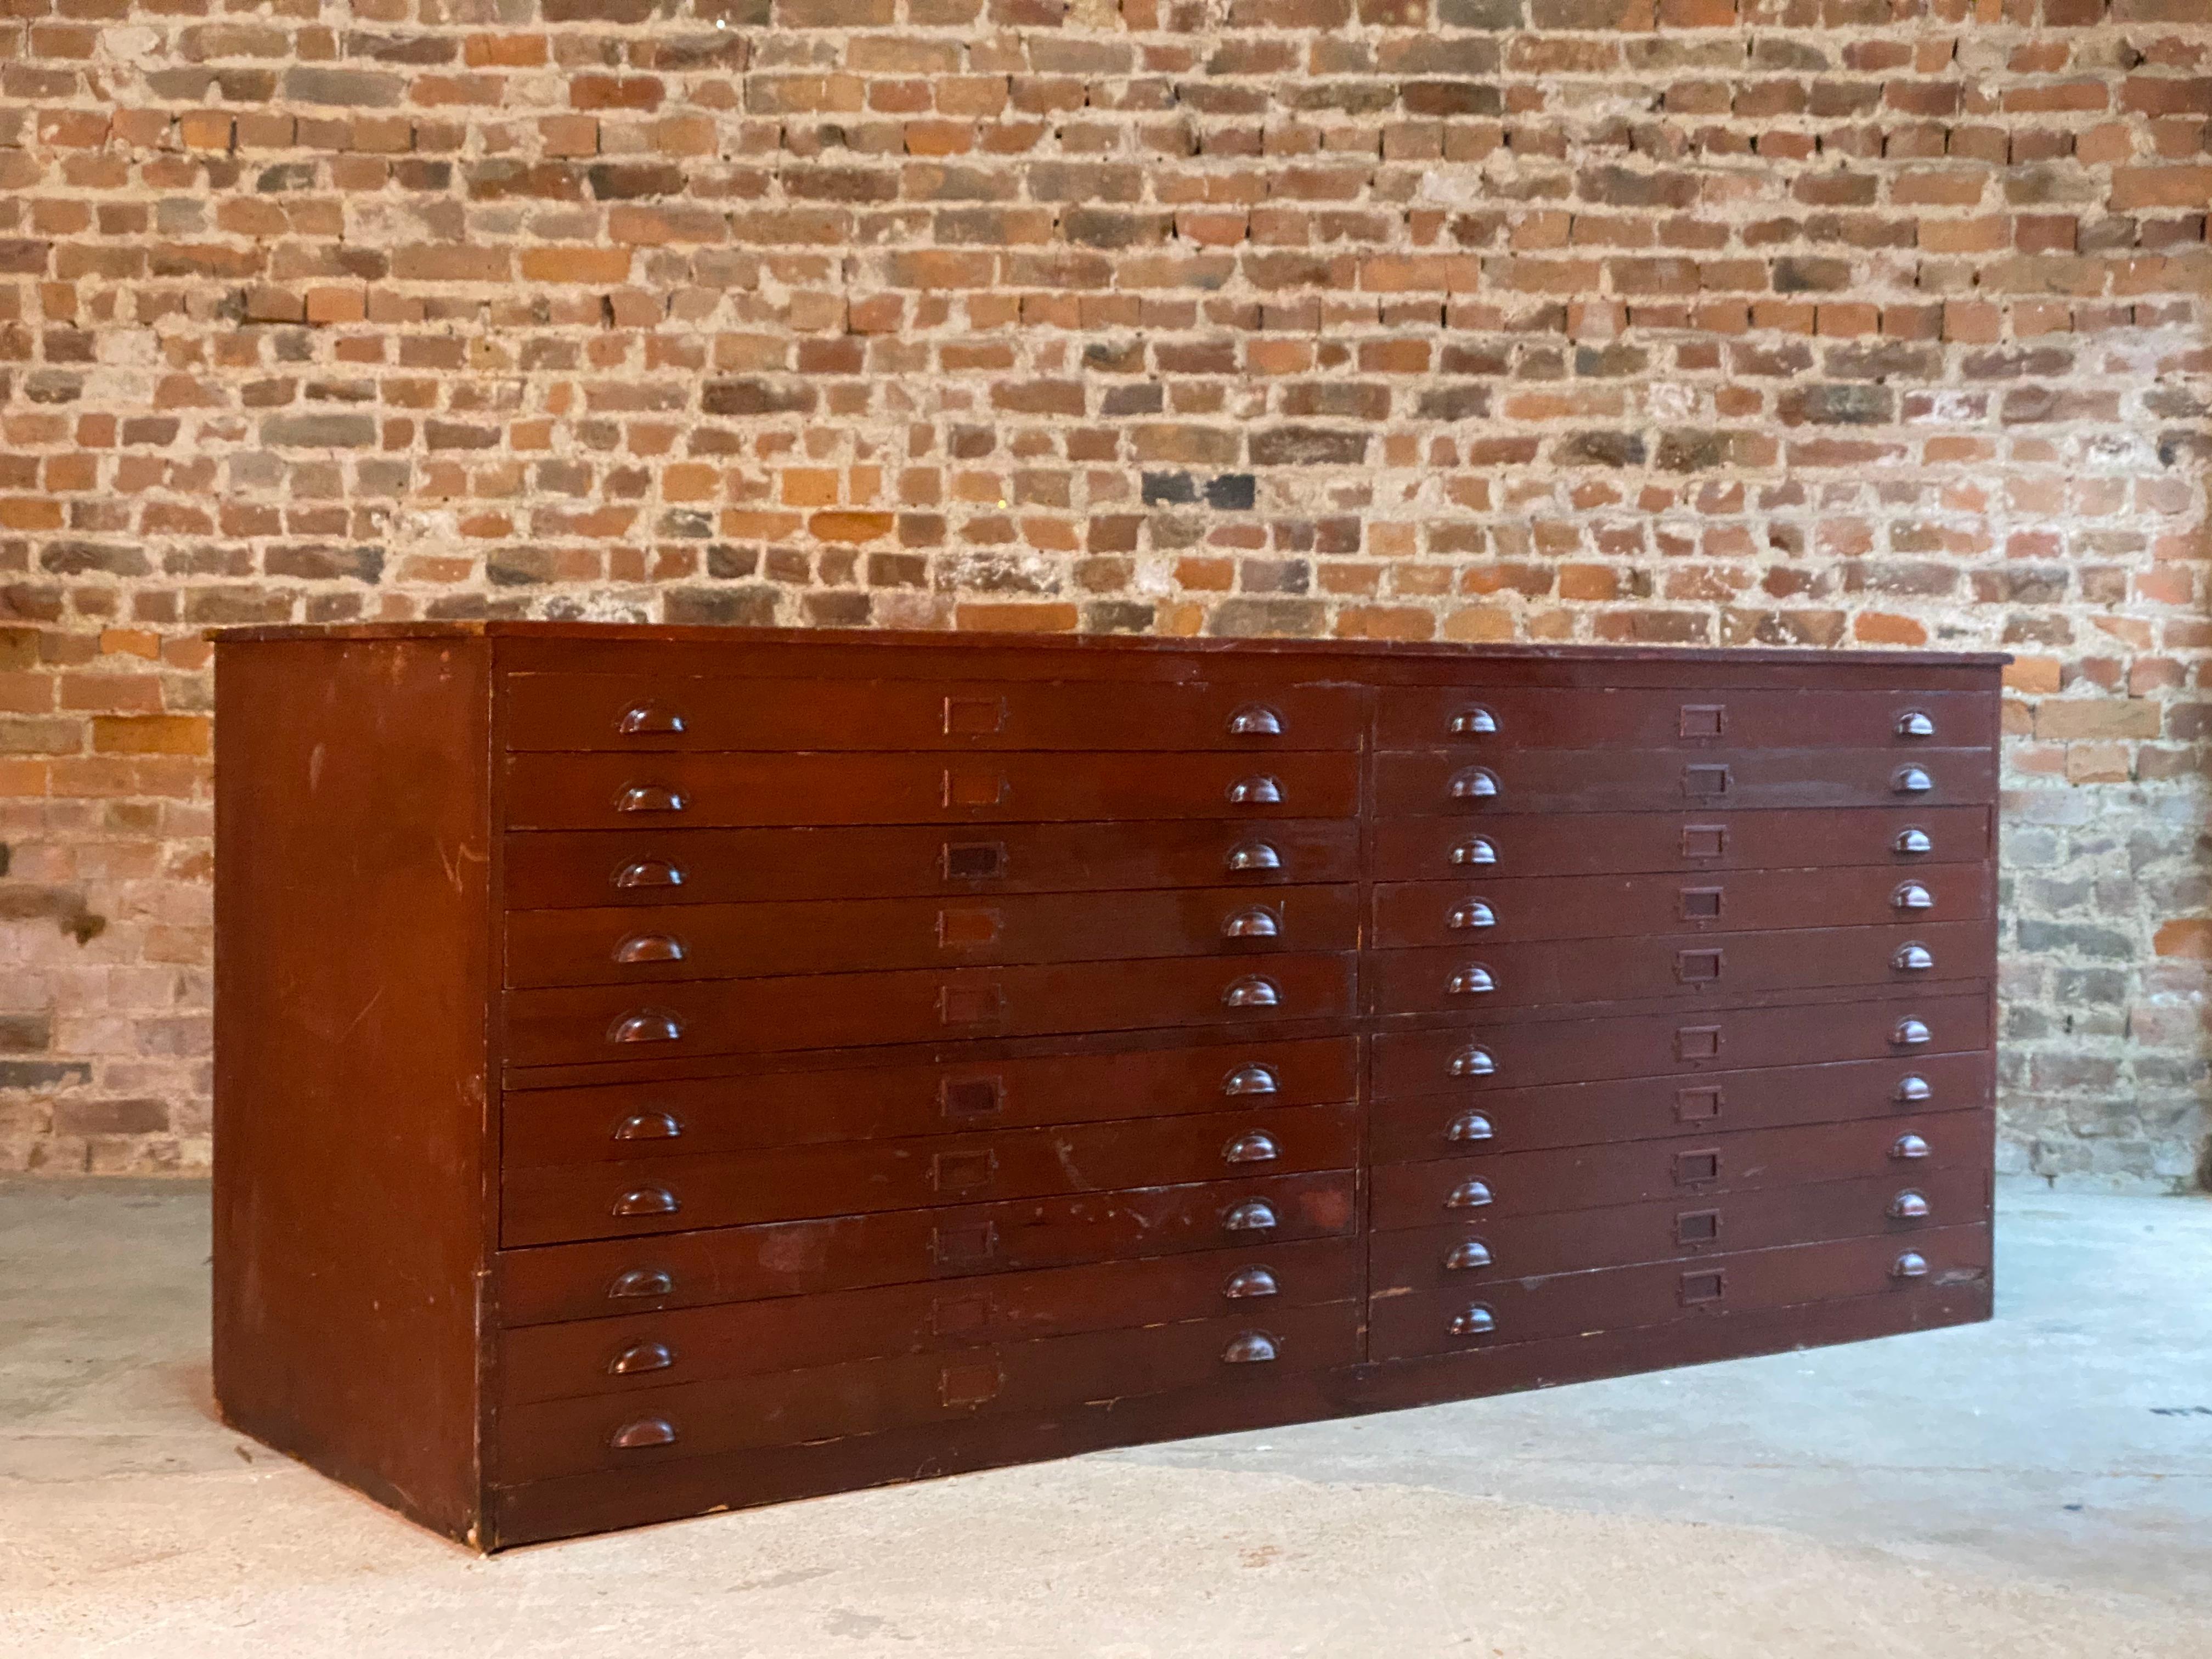 Large haberdashery industrial chest of drawers loft style, circa 1930s

This fabulous heavily distressed large Haberdashery 'Merchants' pine chest of twenty drawers circa 1930s, demonstrates beautifully the bygone industrial era perfectly, ideal